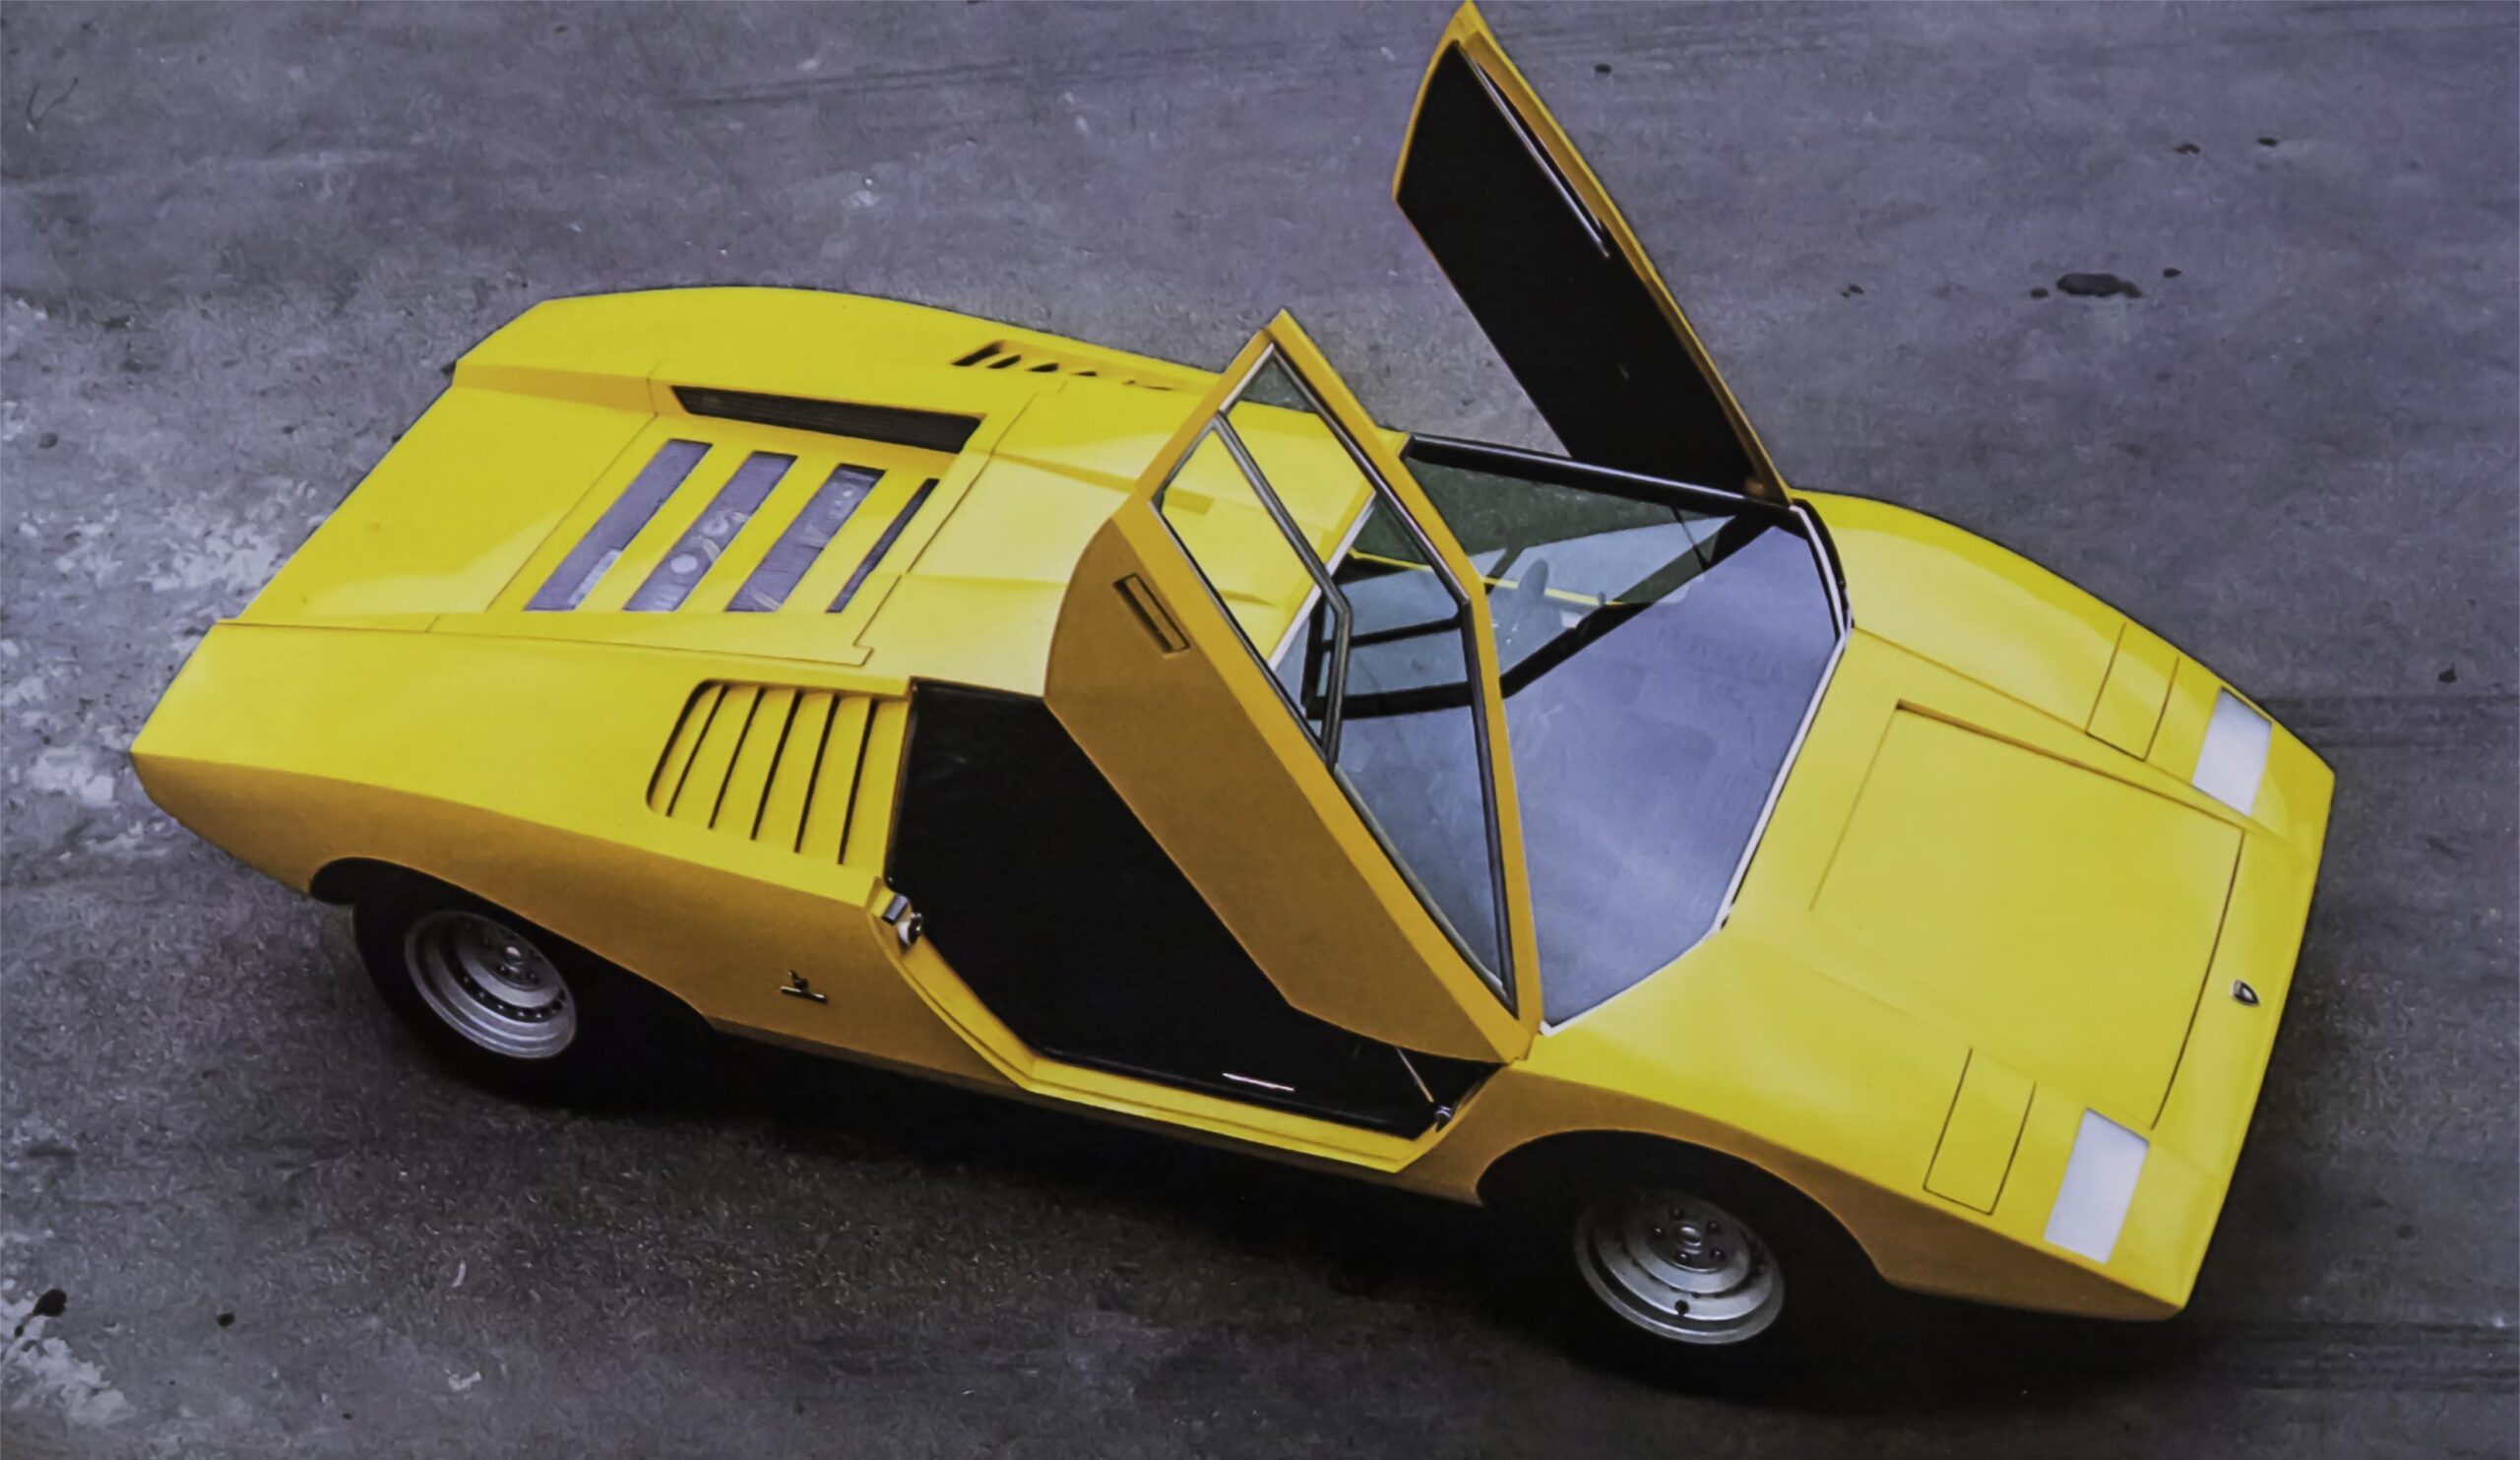 View from top of Mark 1 yellow Lamborghini Countach LP-500 with suicide lambo doors open